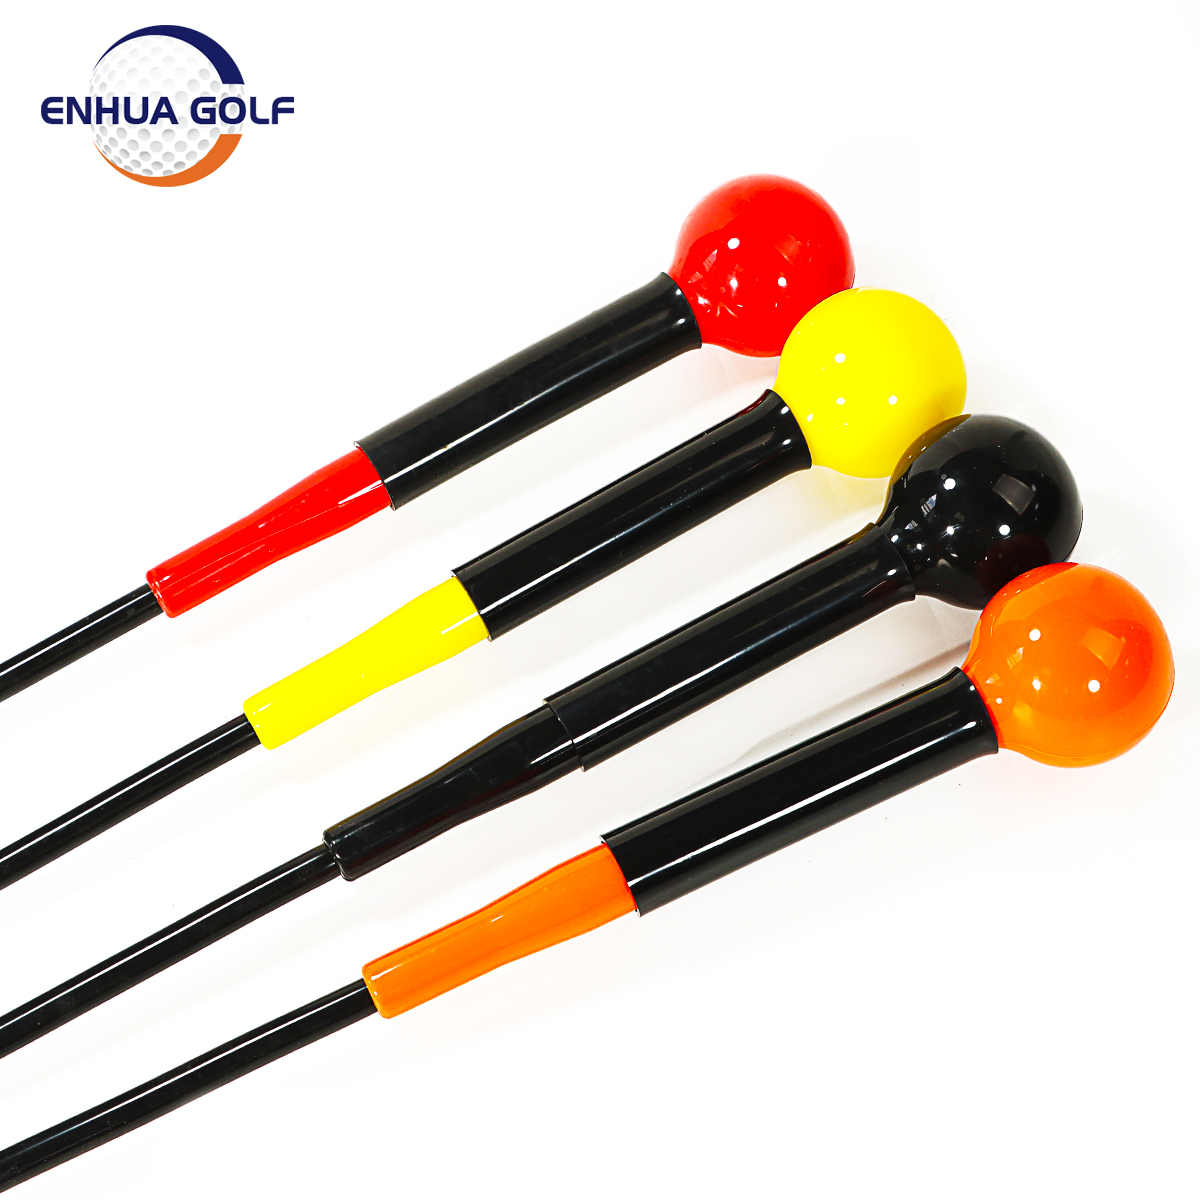 New Grip Golf swing trainer warm up practice stick golf practice club factory supply Featured Image